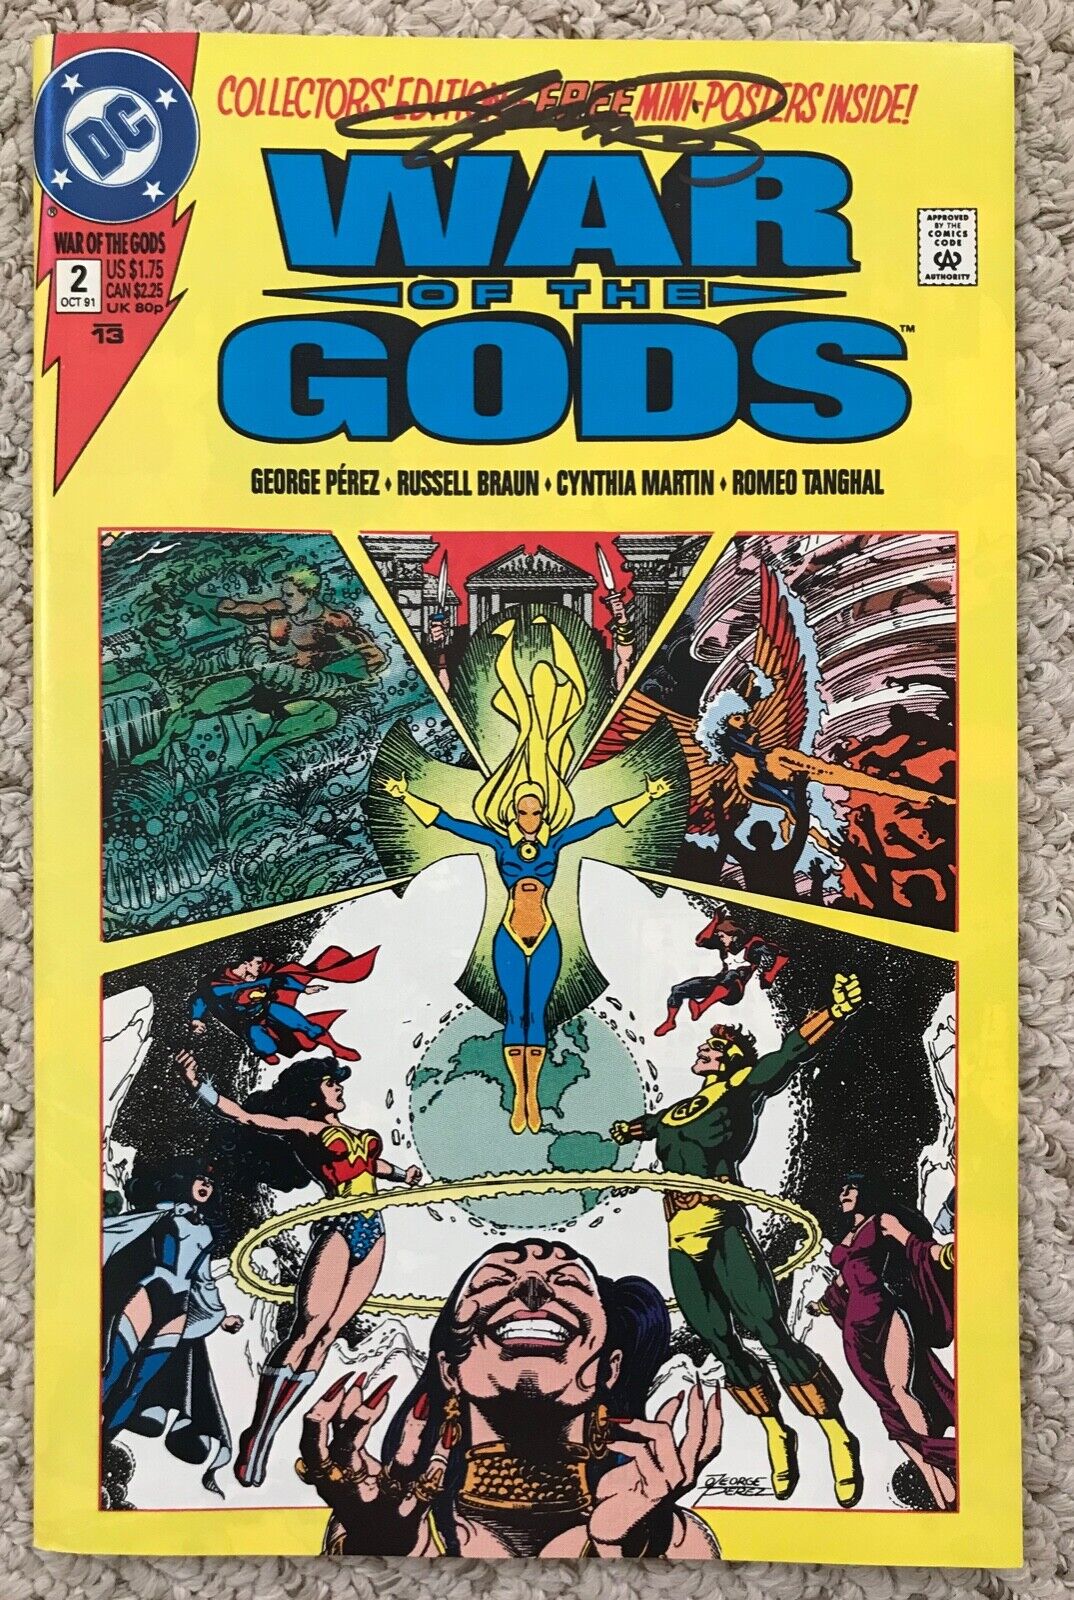 War of the Gods #2 Signed by The Great George Perez DC Comics Very high grade